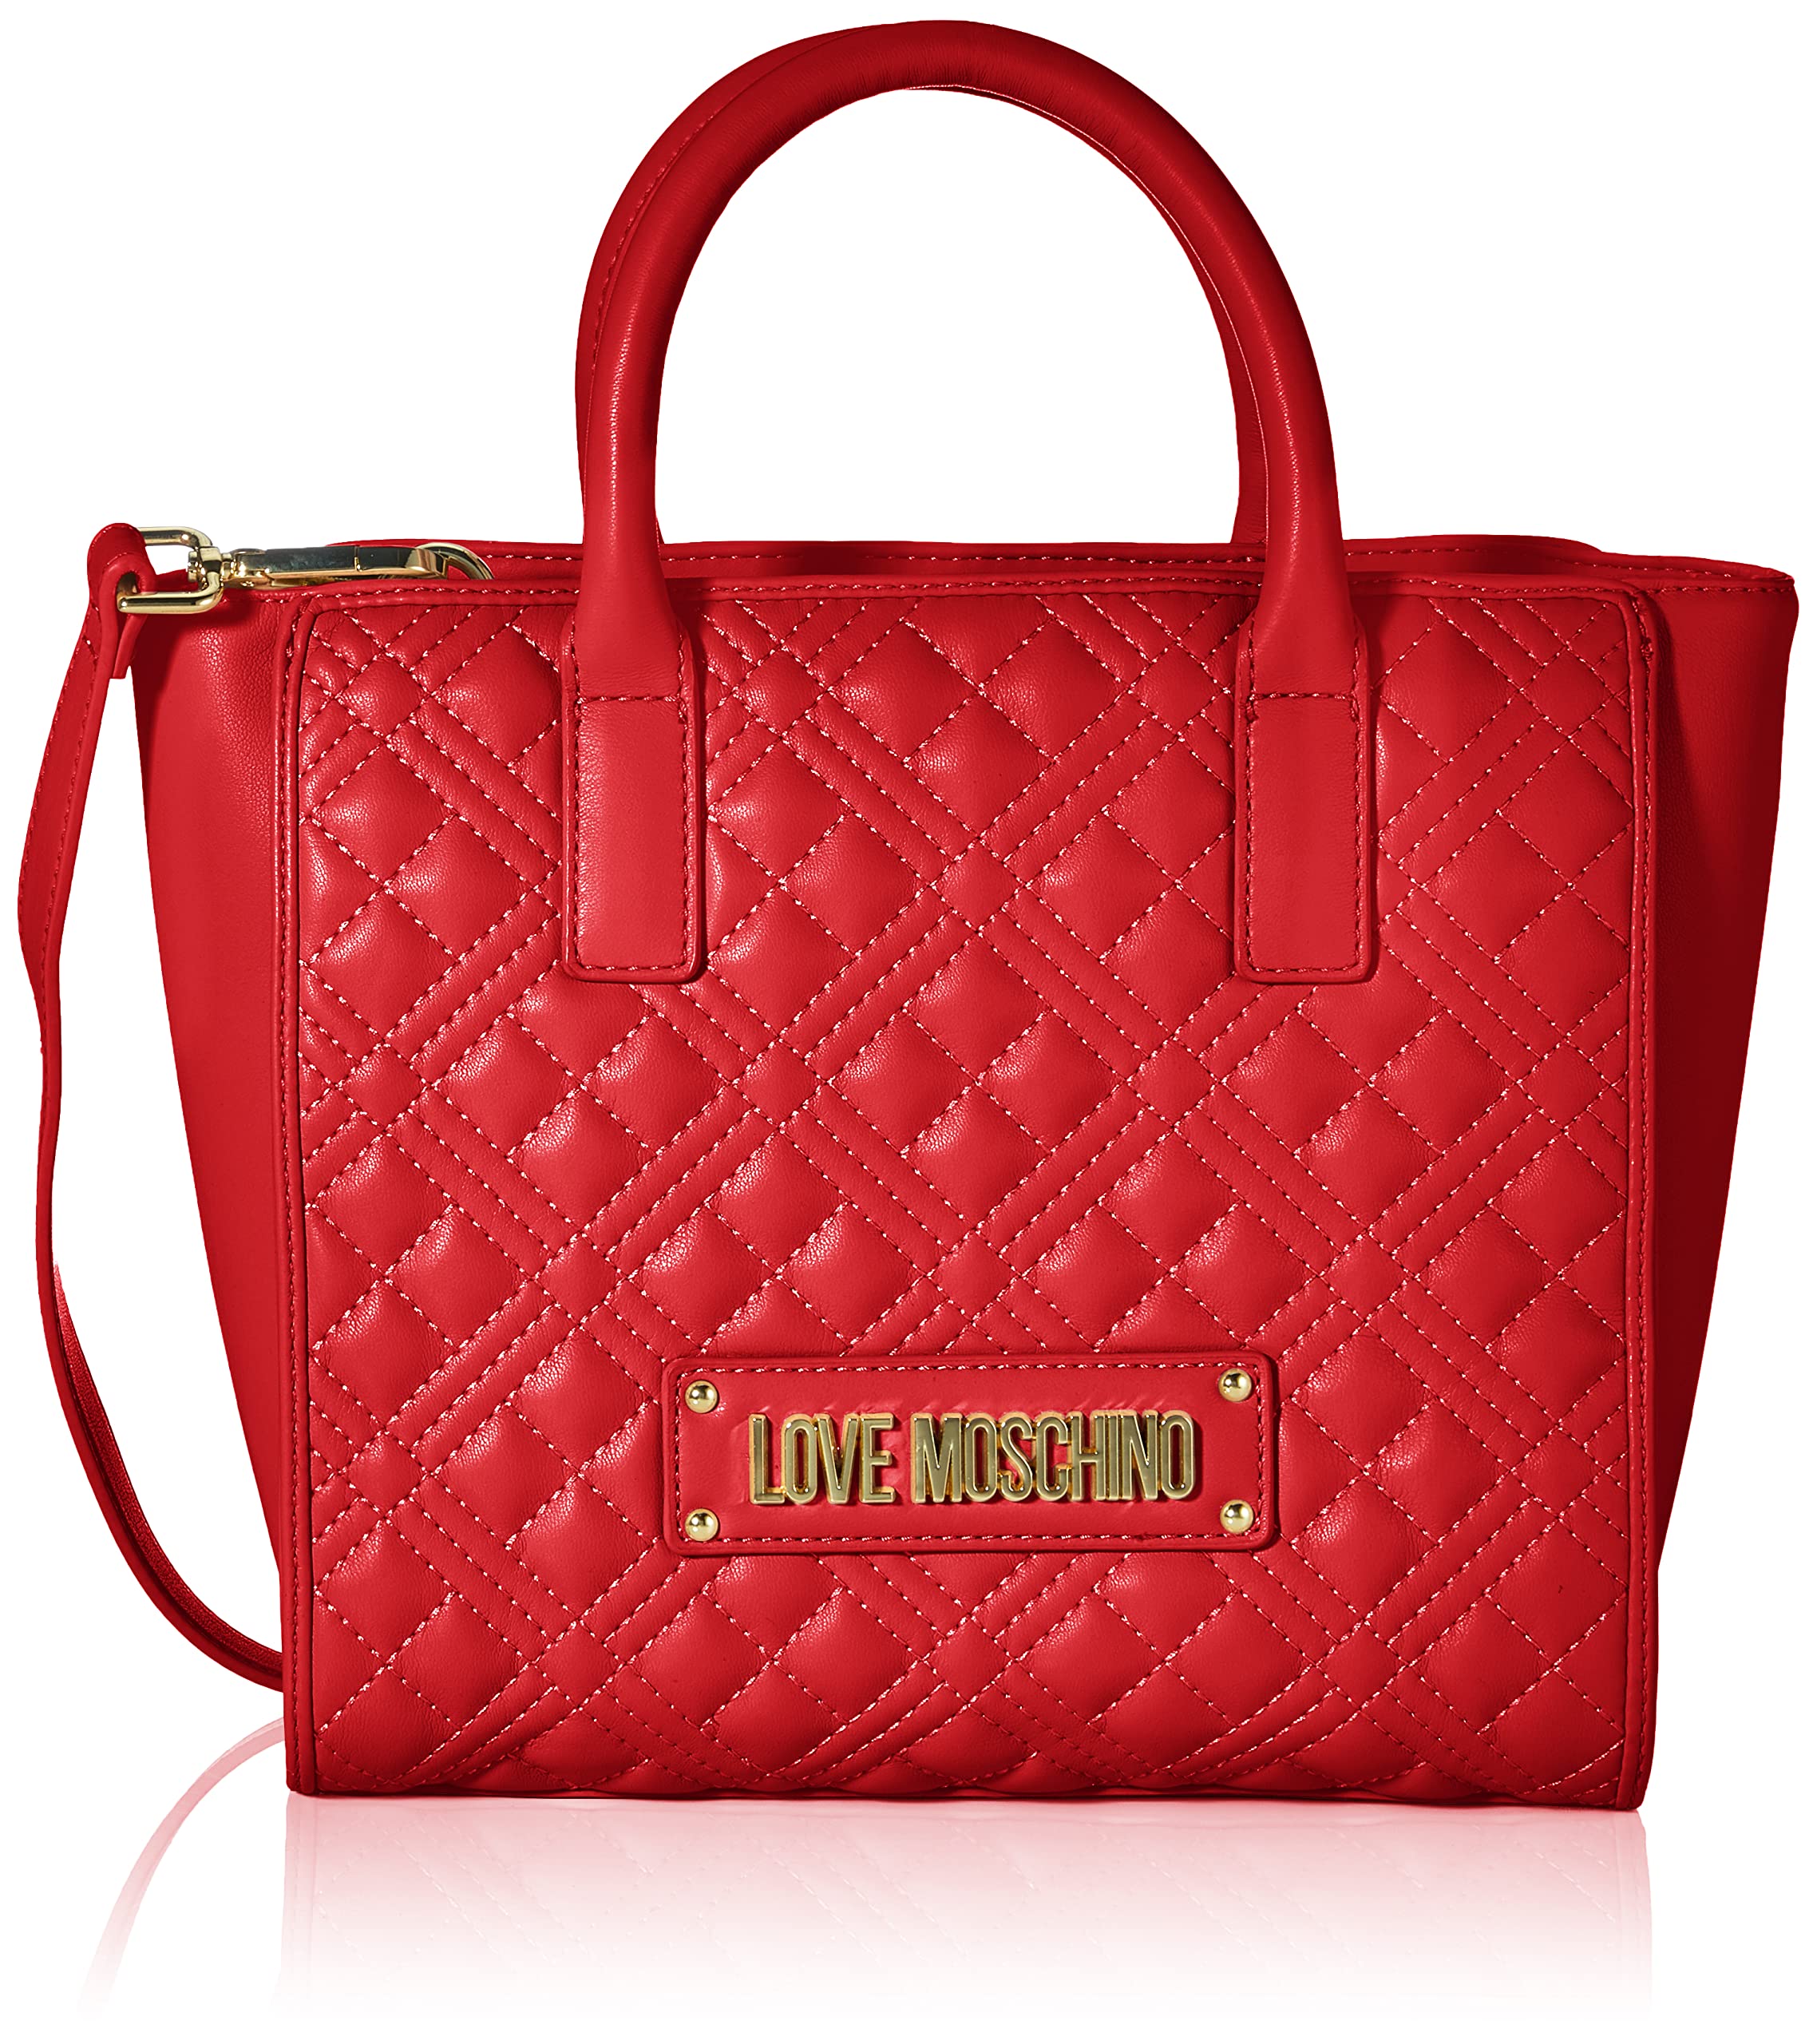 LOVE MOSCHINO | Super Quilted Tote Bag | Women | Black 000 | Flannels